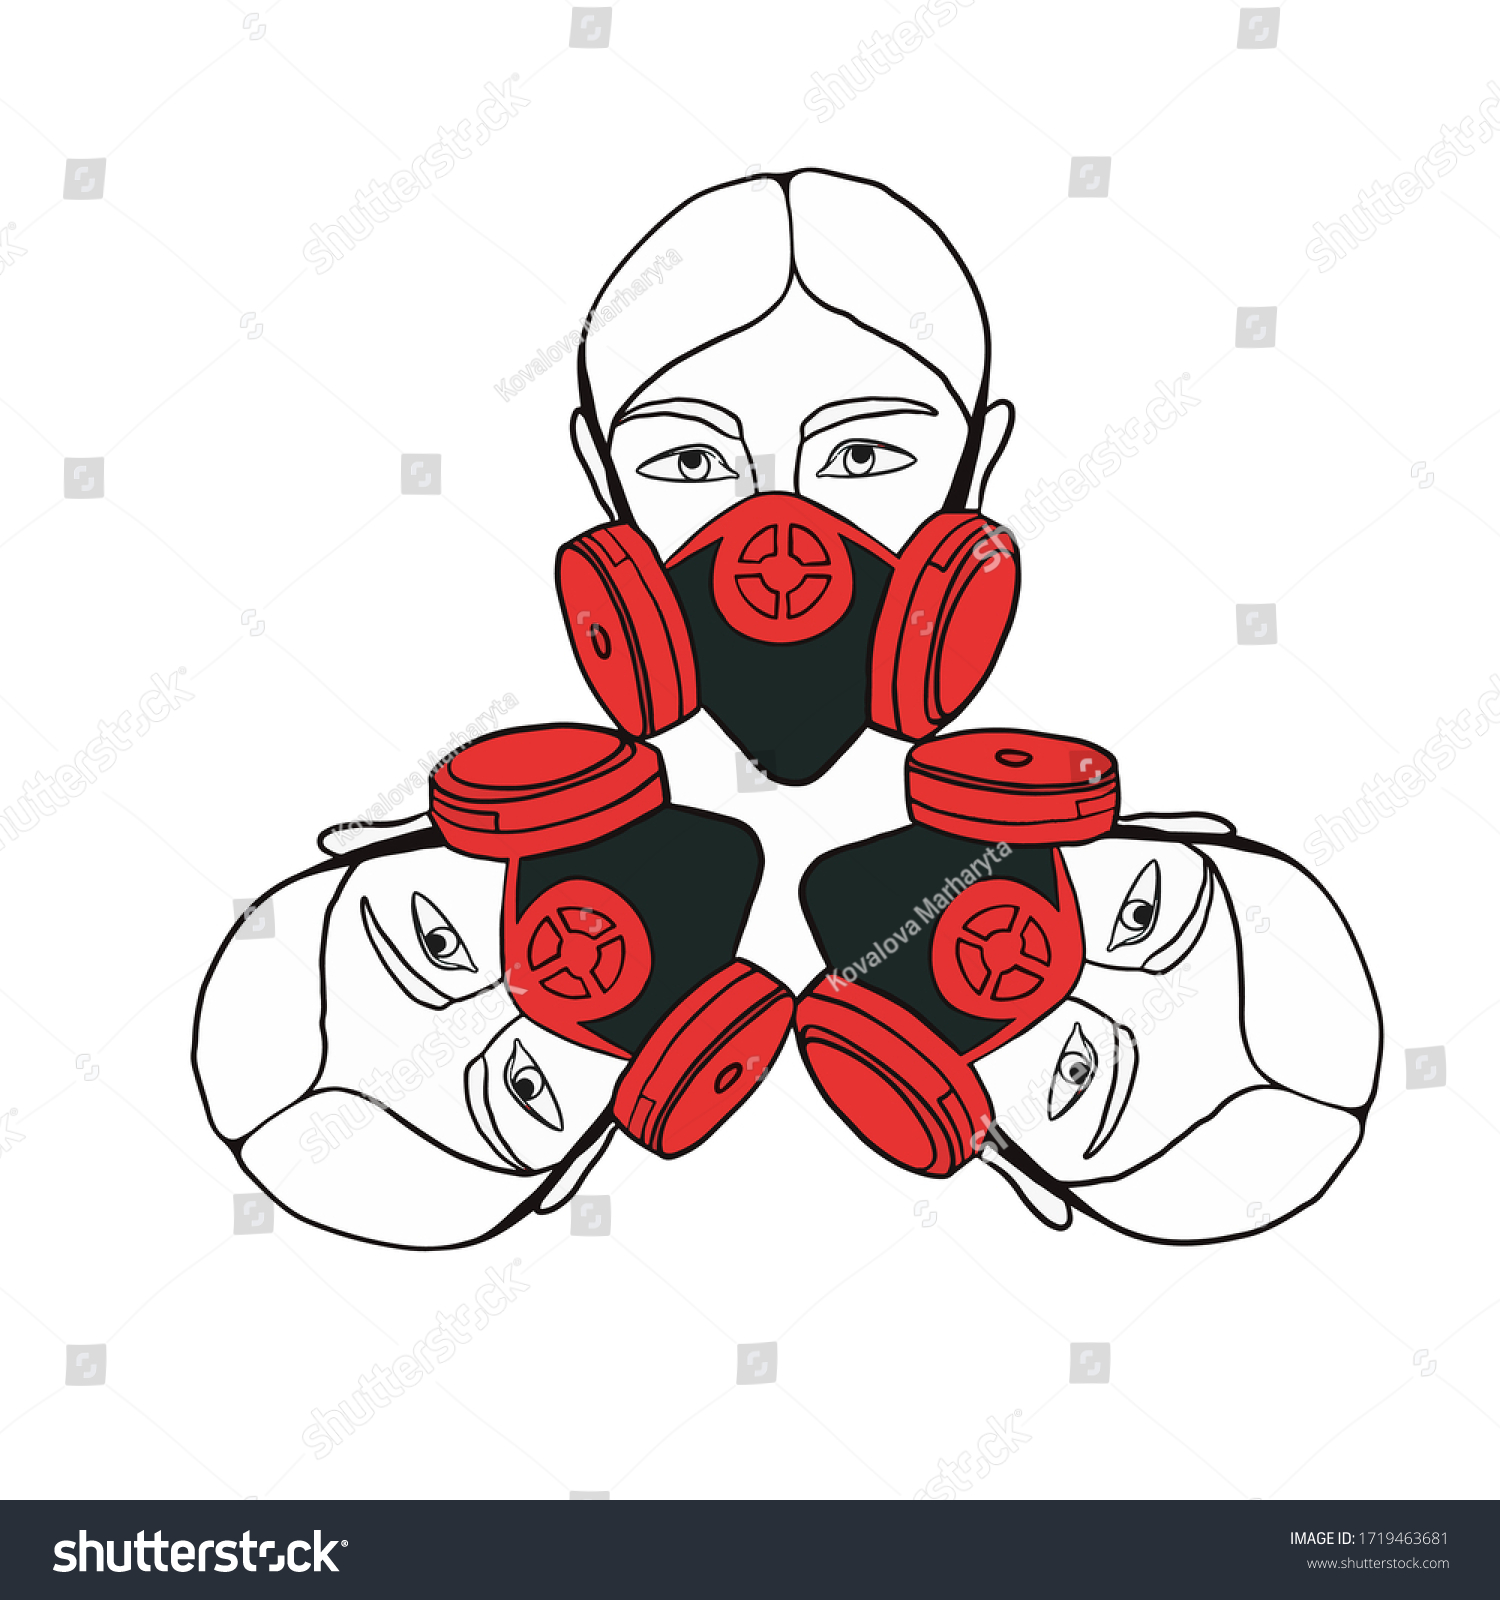 SVG of Girl in a protective mask  Allergy. Vector illustration on white background. For cards, posters, decor it can be used as a print for t-shirts and bags. Logo design, printed products. Pain icon. svg